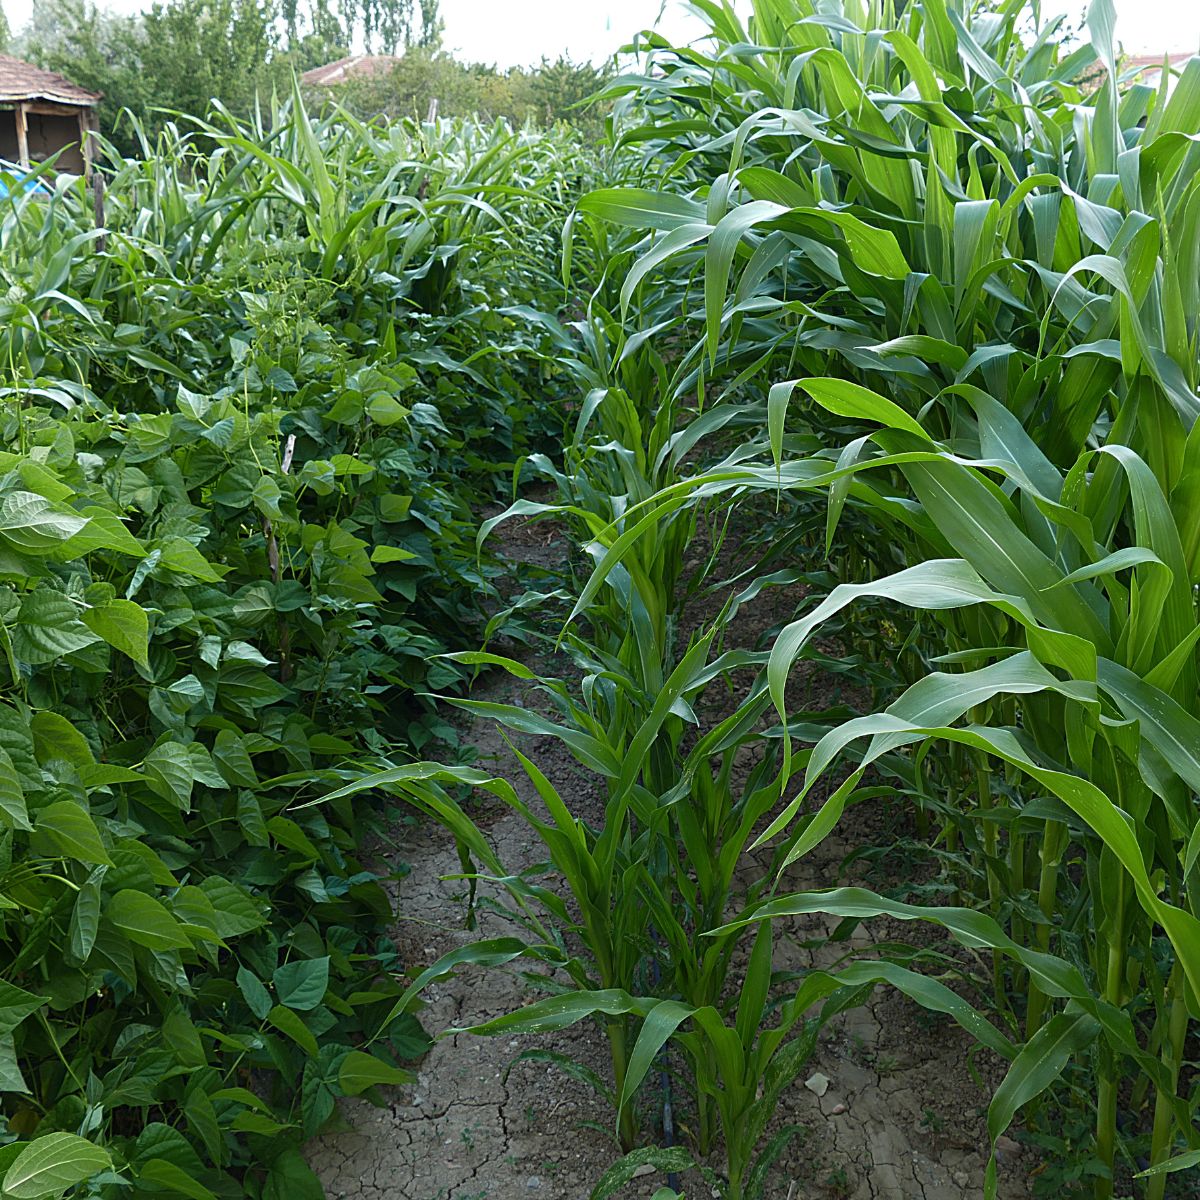 corn and beans interplanted in the garden